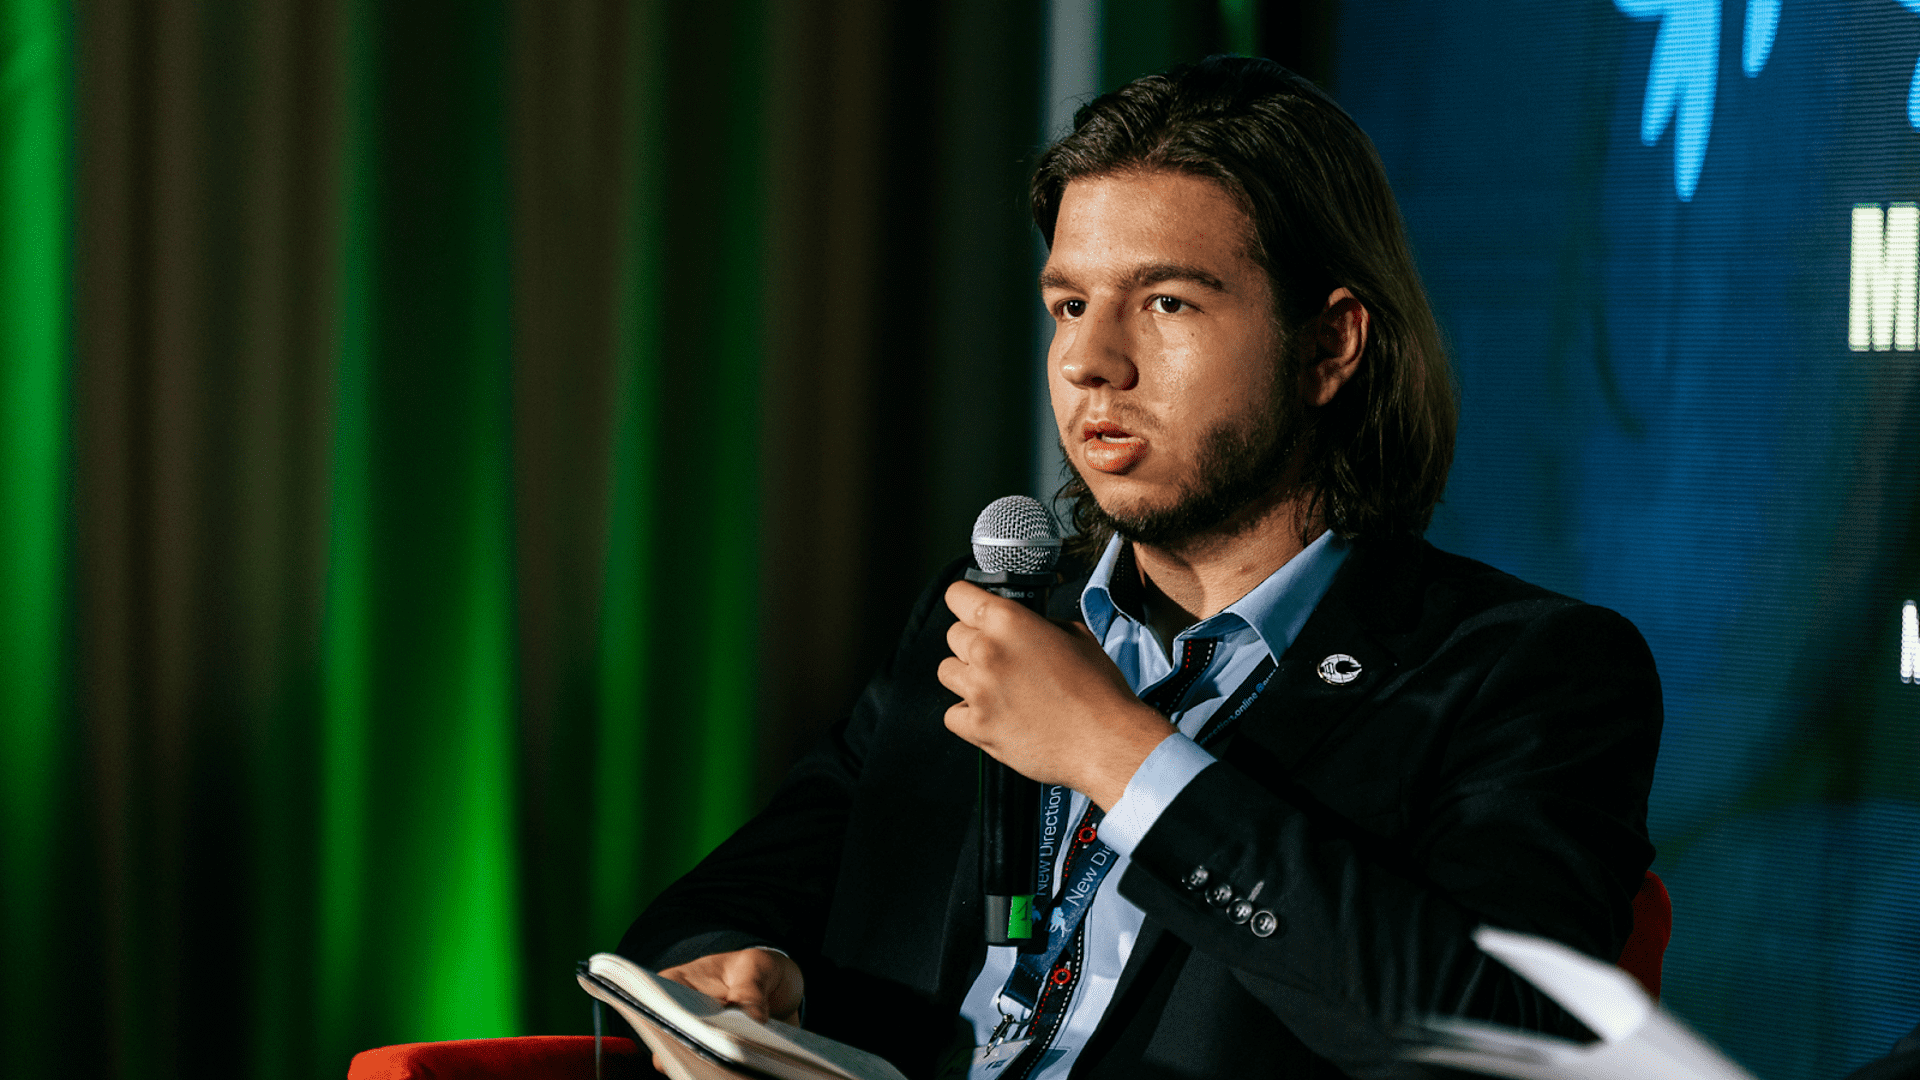 Filip Blaha, National Coordinator for the Czech team that recently won our Group of the Year award, is leading the charge for free-market environmentalism